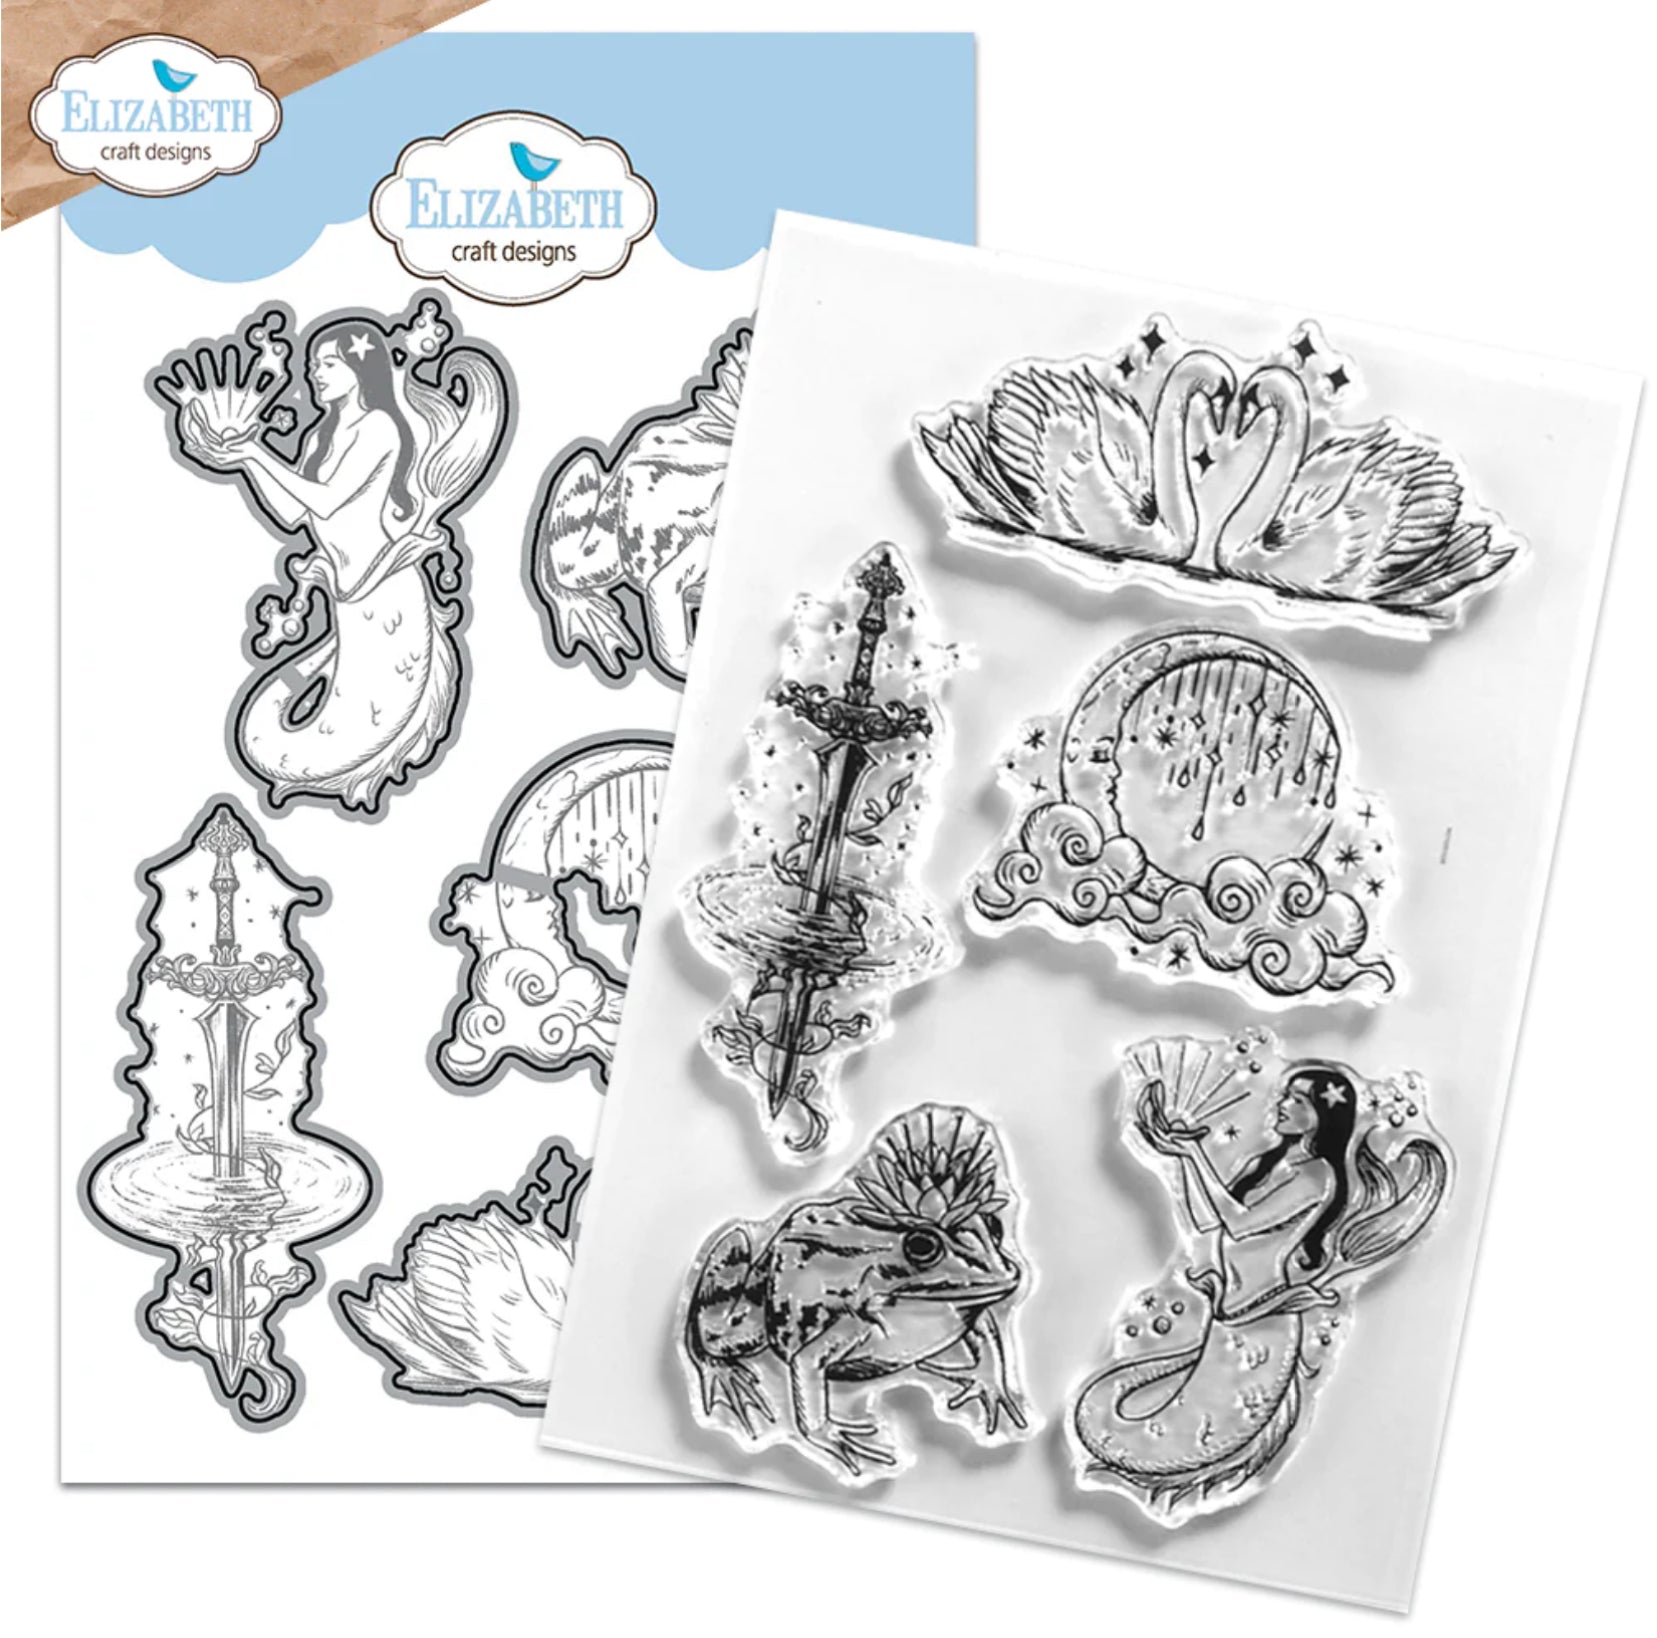 Swan Lake Stamps and Die Set for Card Making, with Embossing